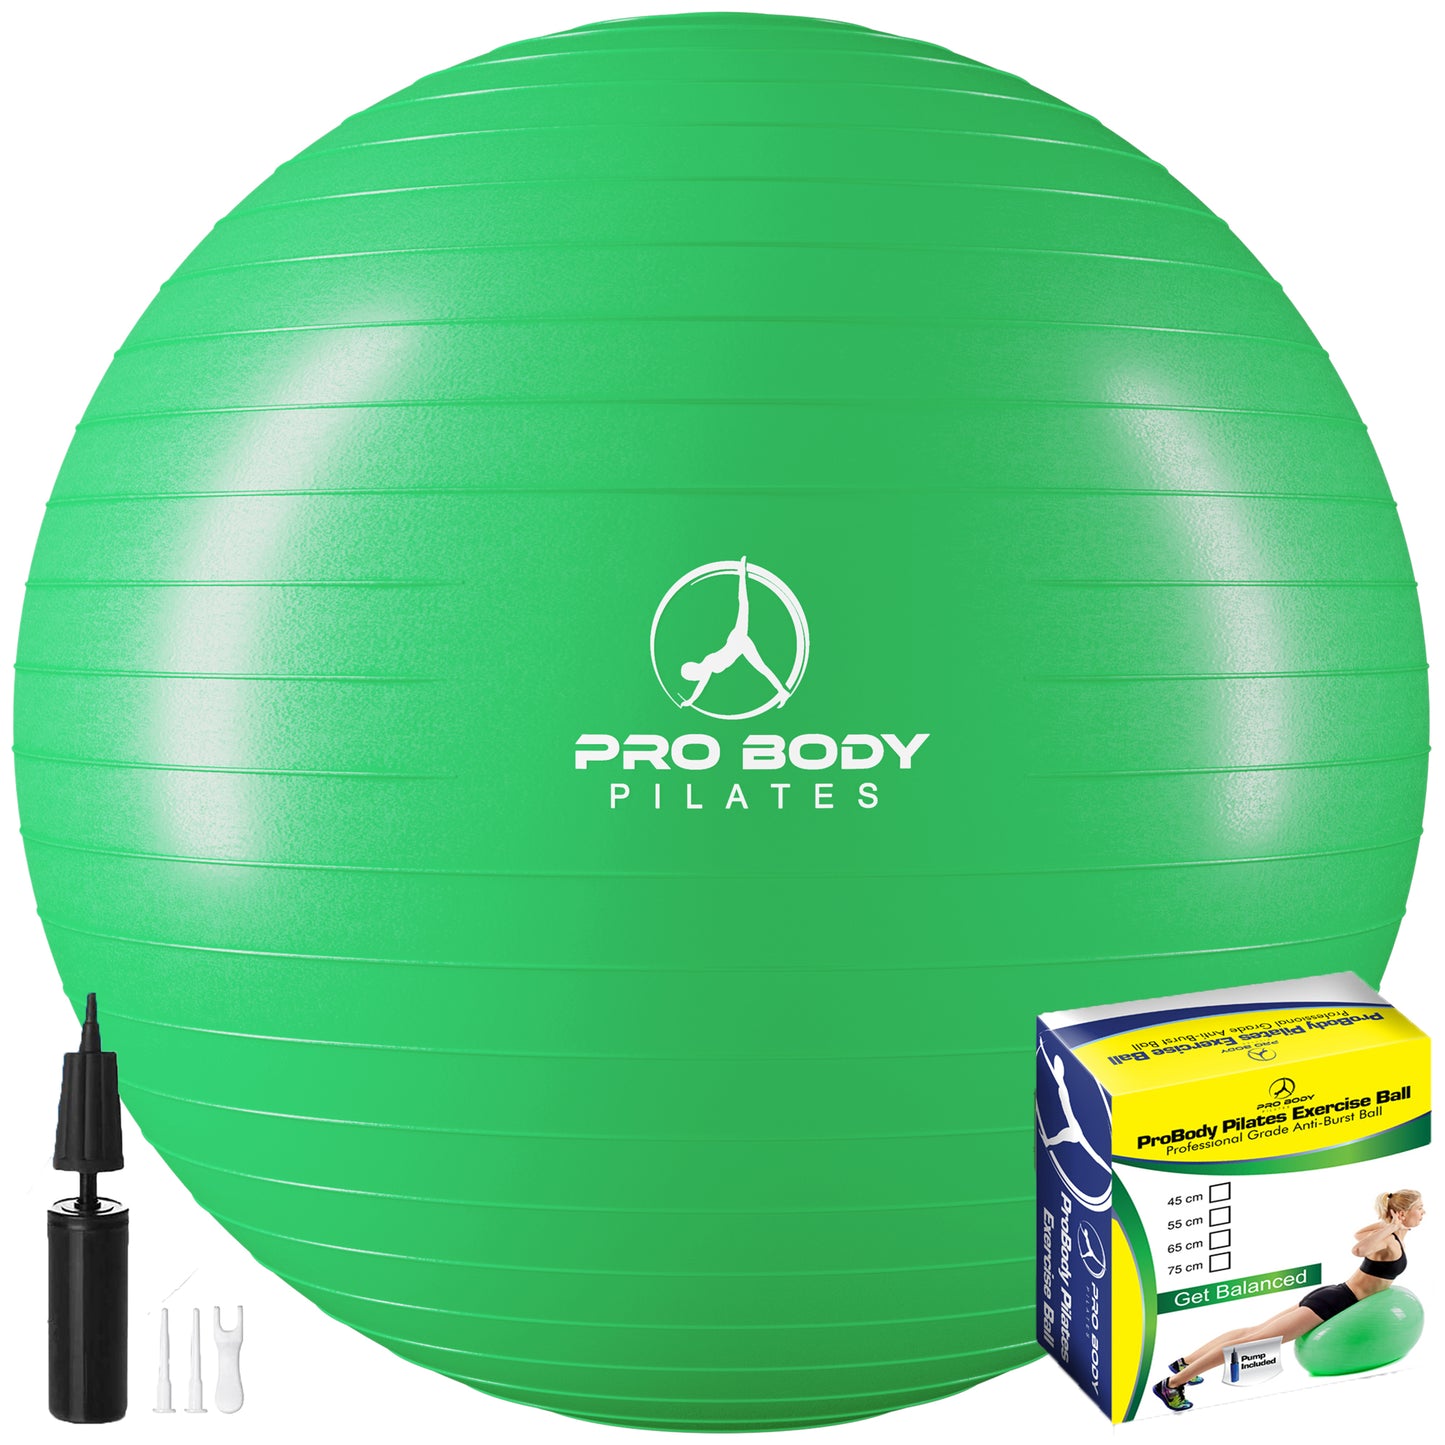 Yoga Ball for Pregnancy, Fitness, Balance, Workout at Home, Office and Physical Therapy (Green)